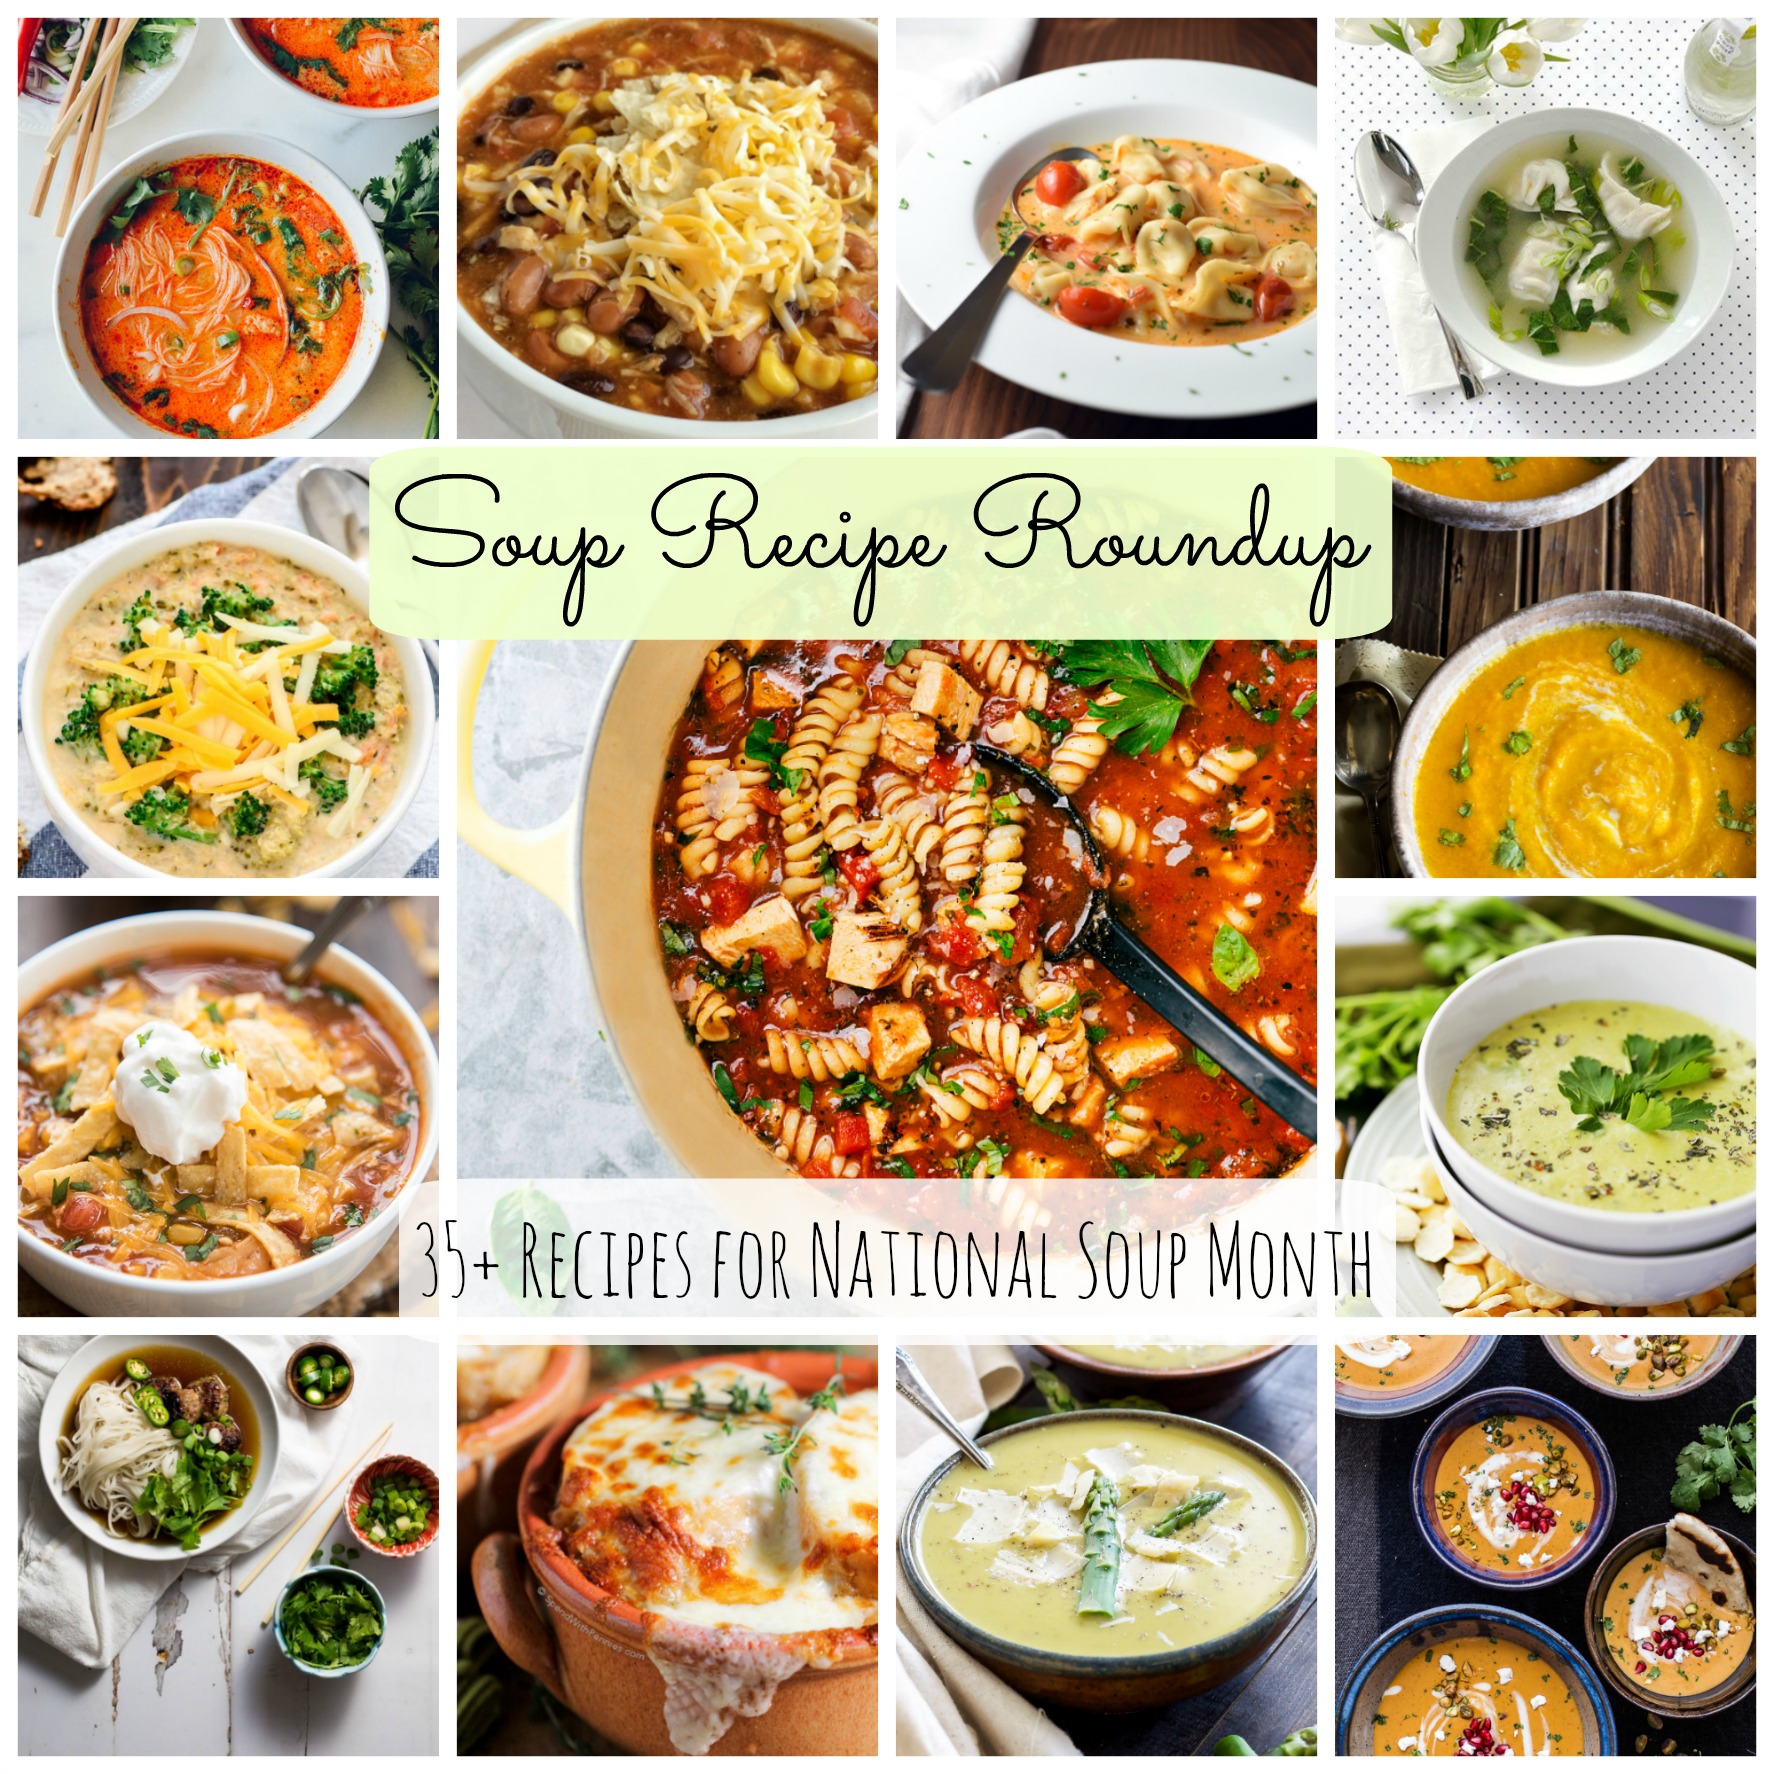 Soup Recipe Roundup: 35+ Soup Recipes for National Soup Month